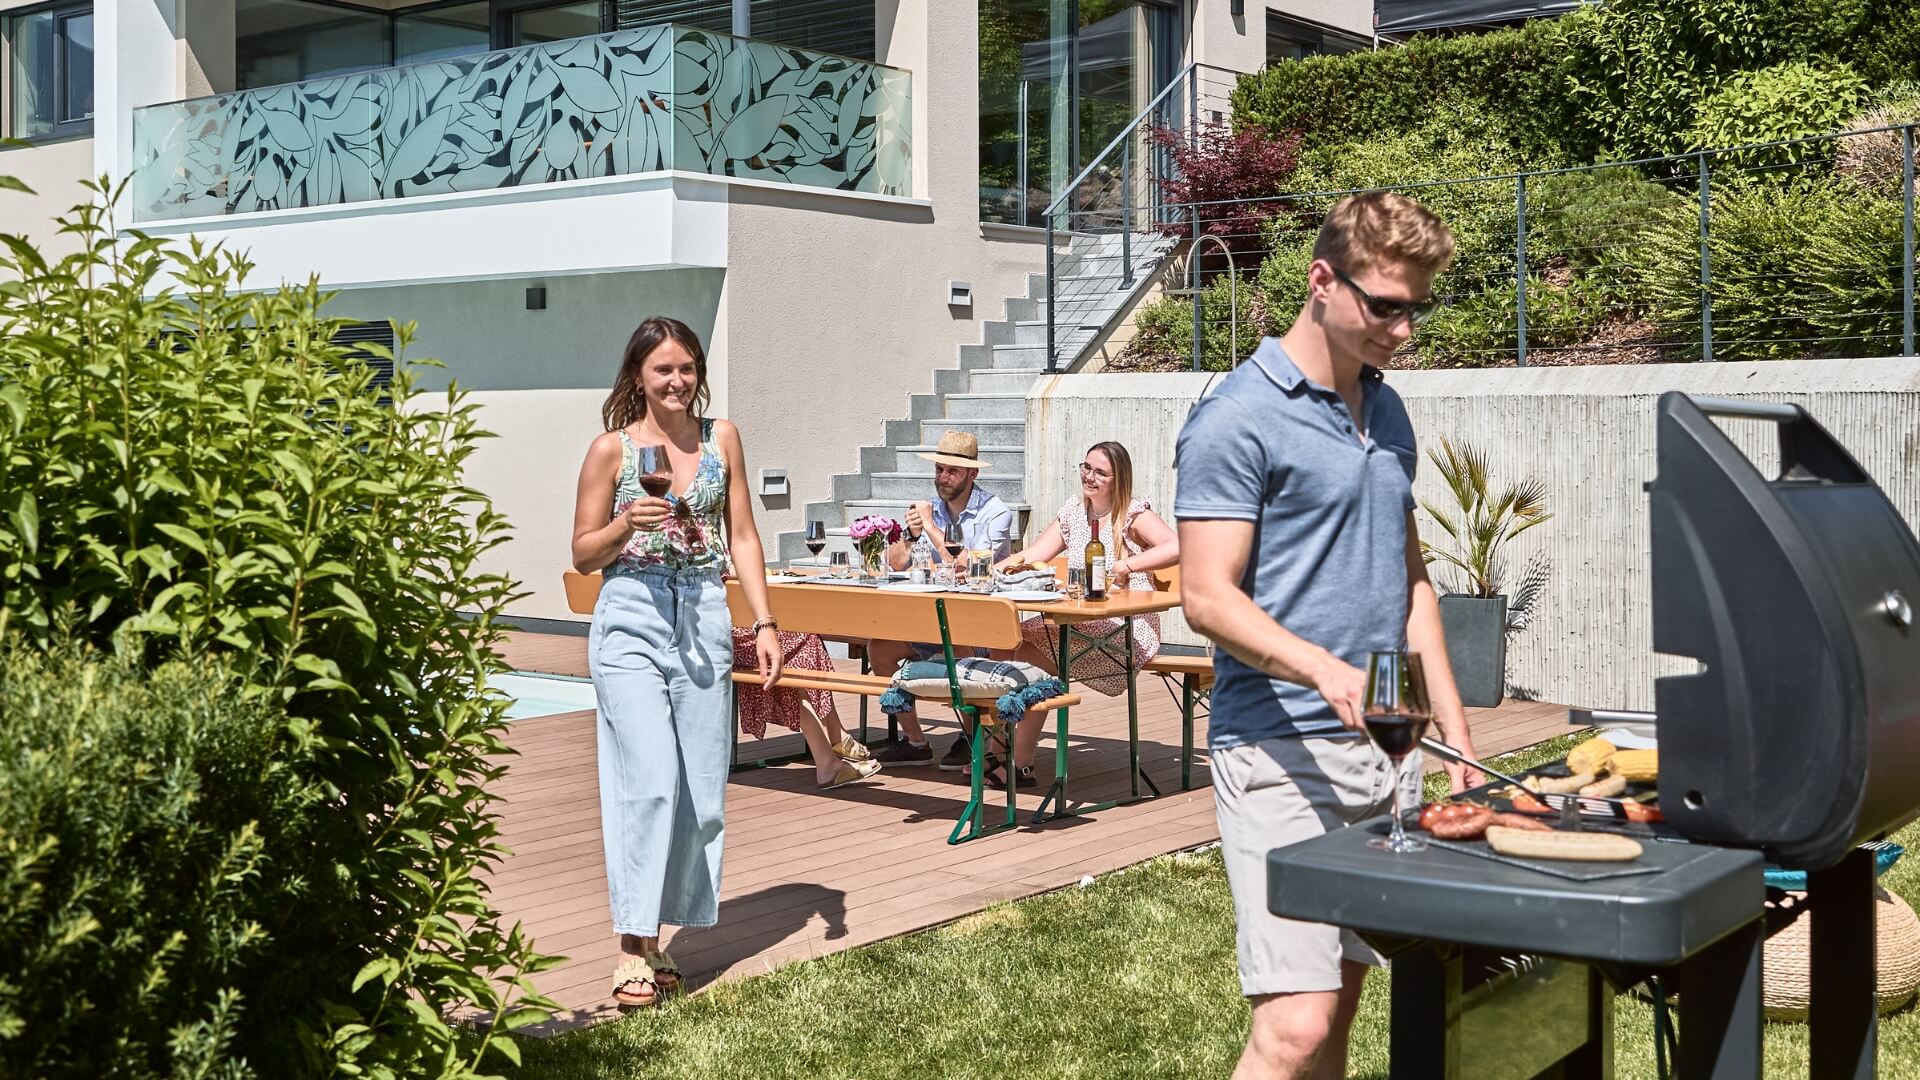 A barbecue party is taking place in the garden and the wide beer garden table set with backrest is used to relax.